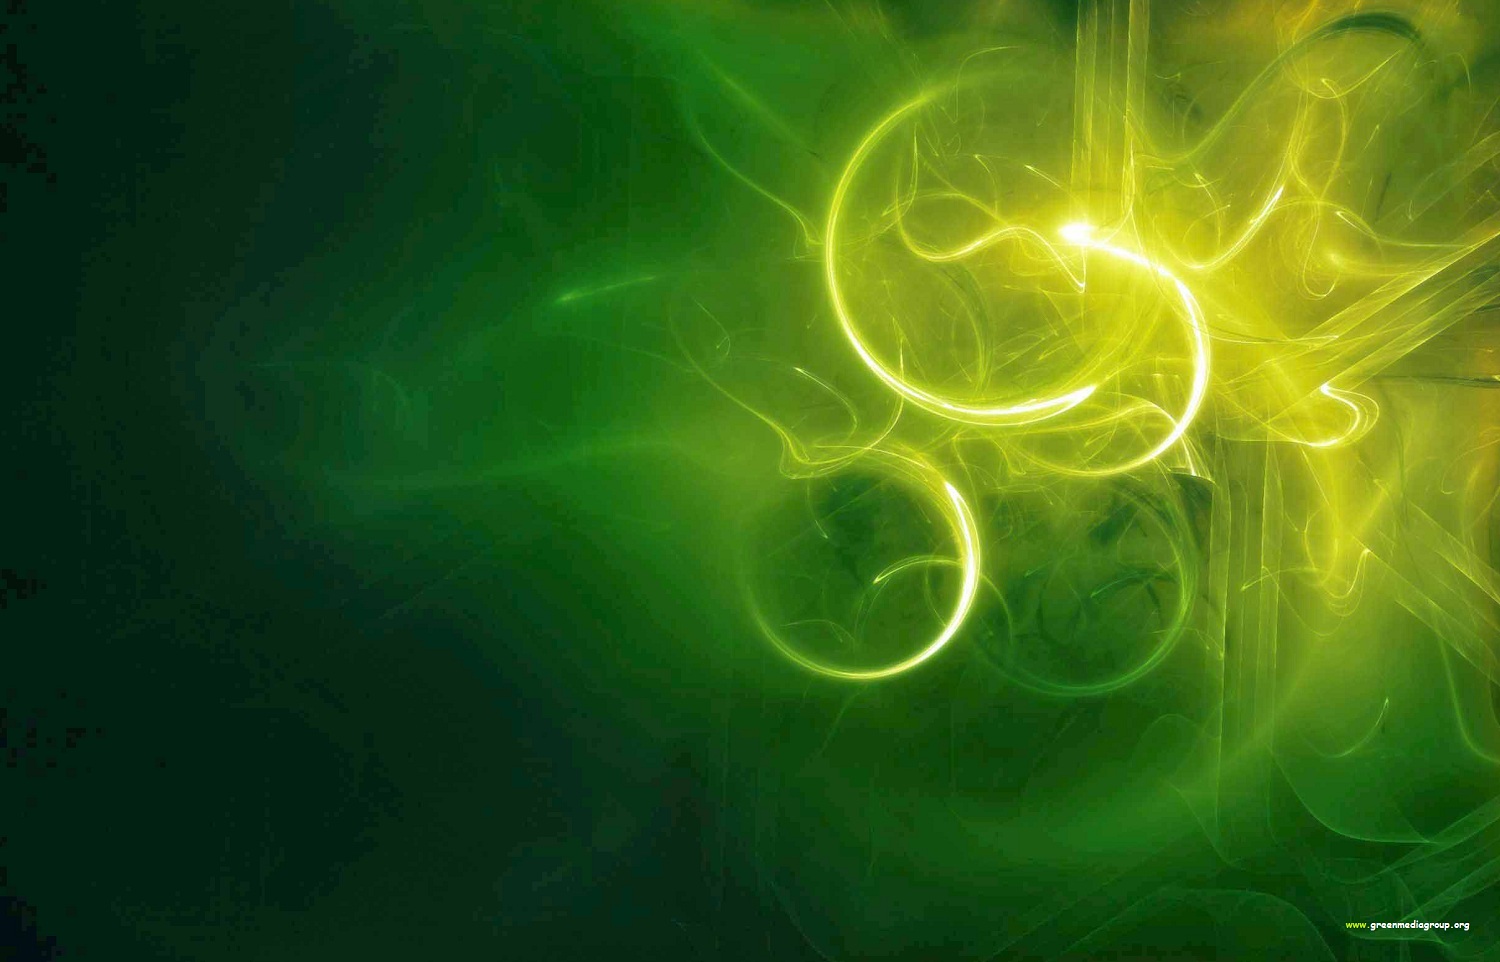 🔥 Free download EPIC GREEN AND GOLD BACKGROUNDS [1500x962] for your